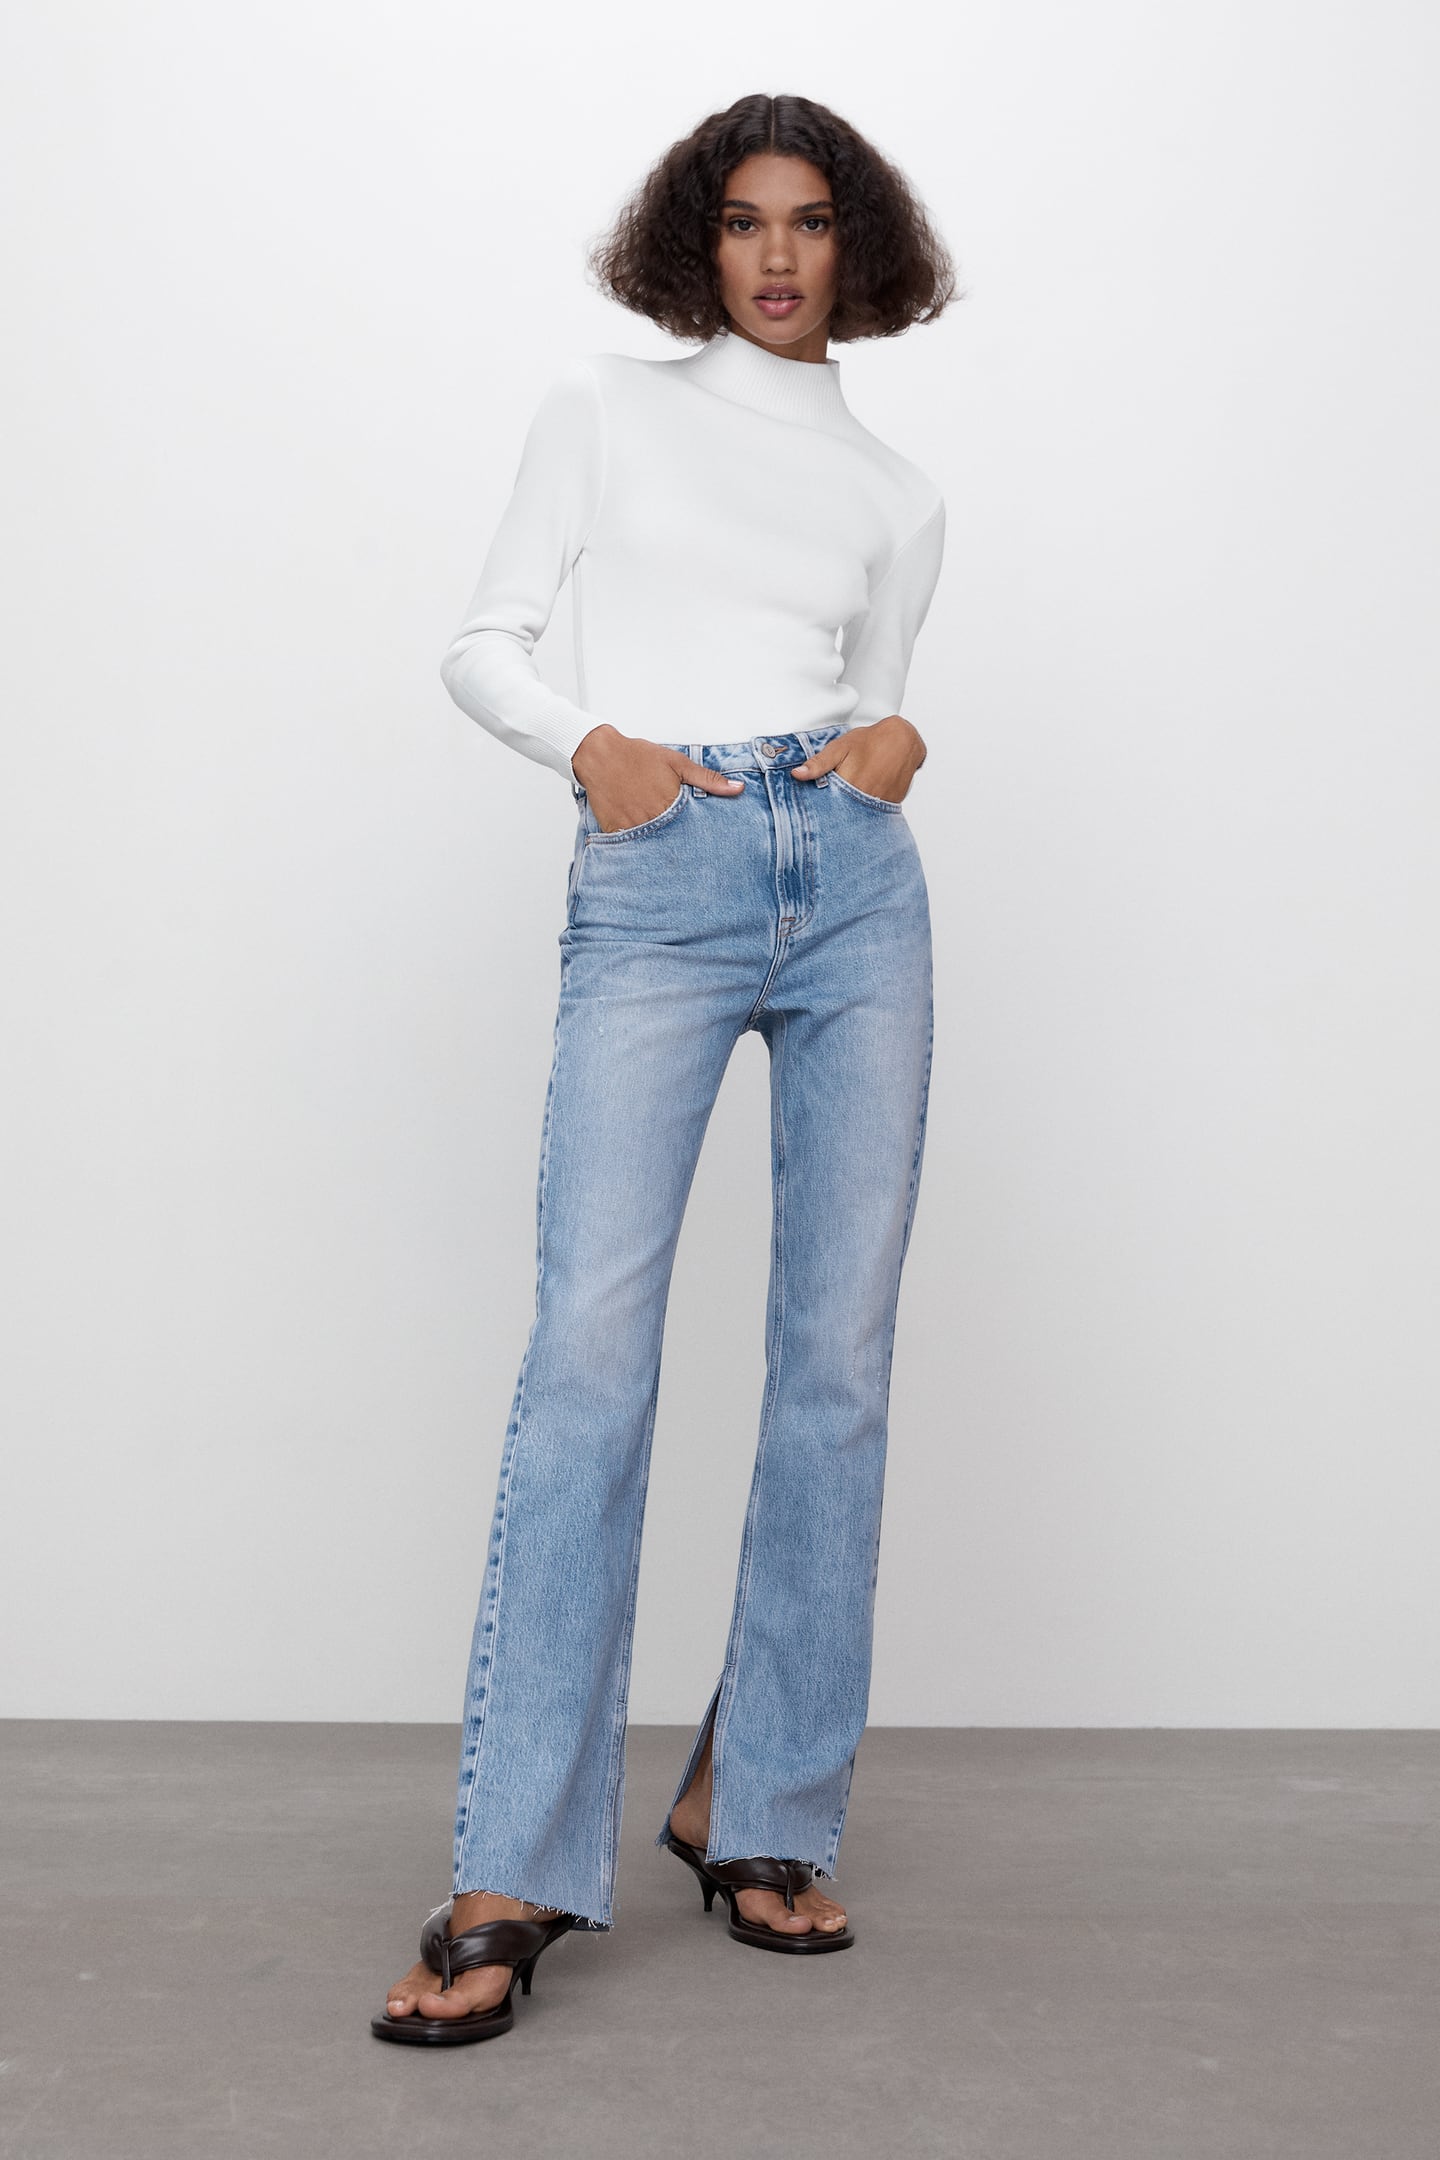 Are flared jeans in style in 2021? - Wear Next.